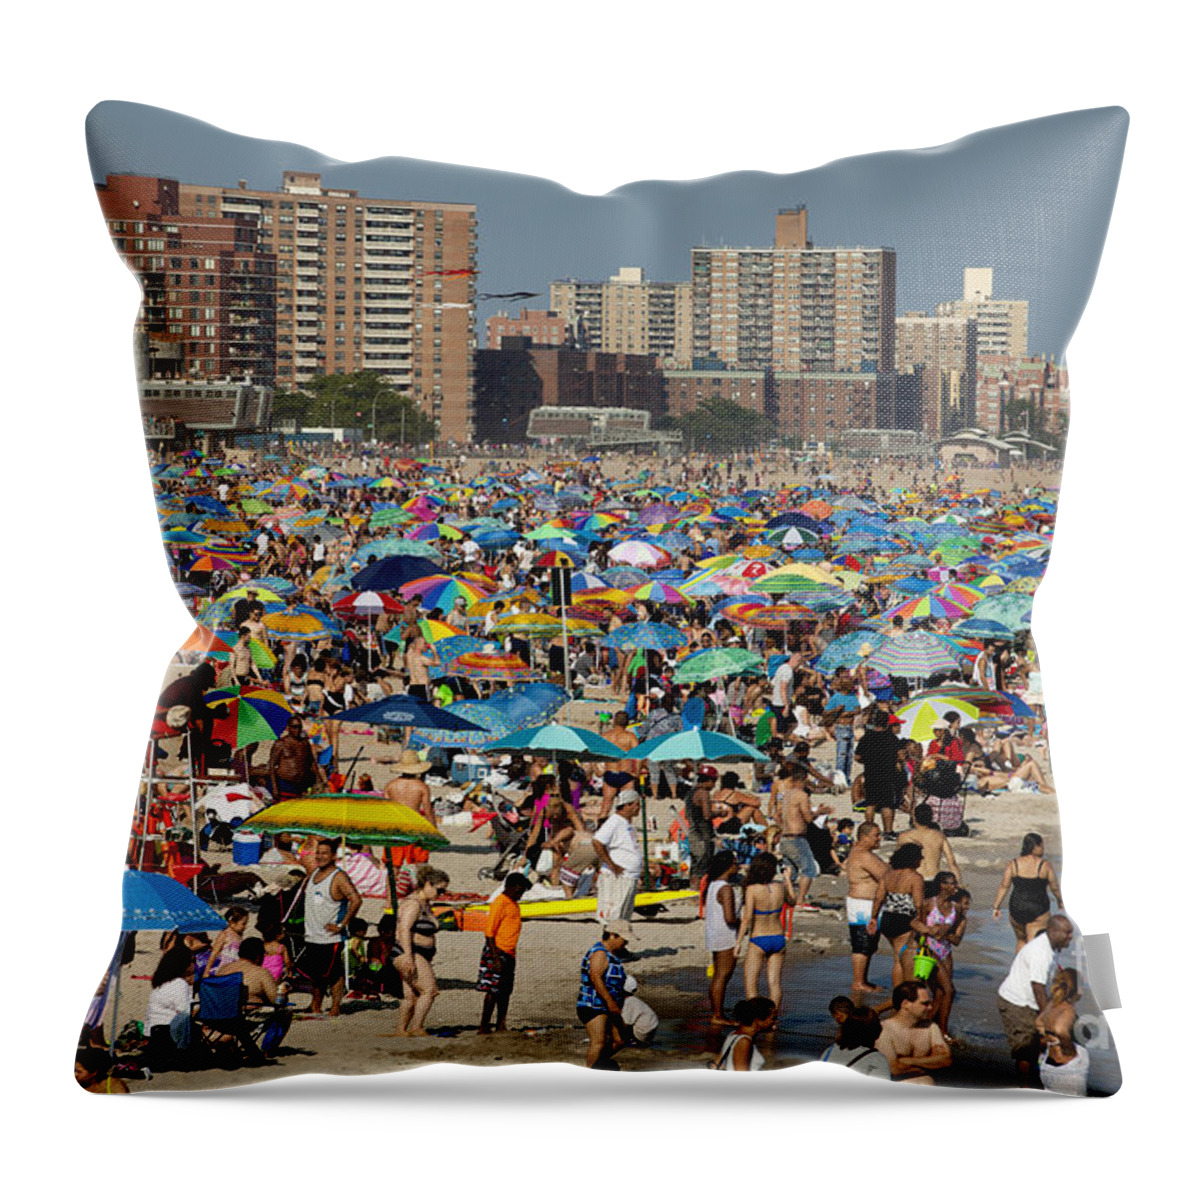 Coney Island Throw Pillow featuring the photograph Coney Island - New York City #5 by Anthony Totah